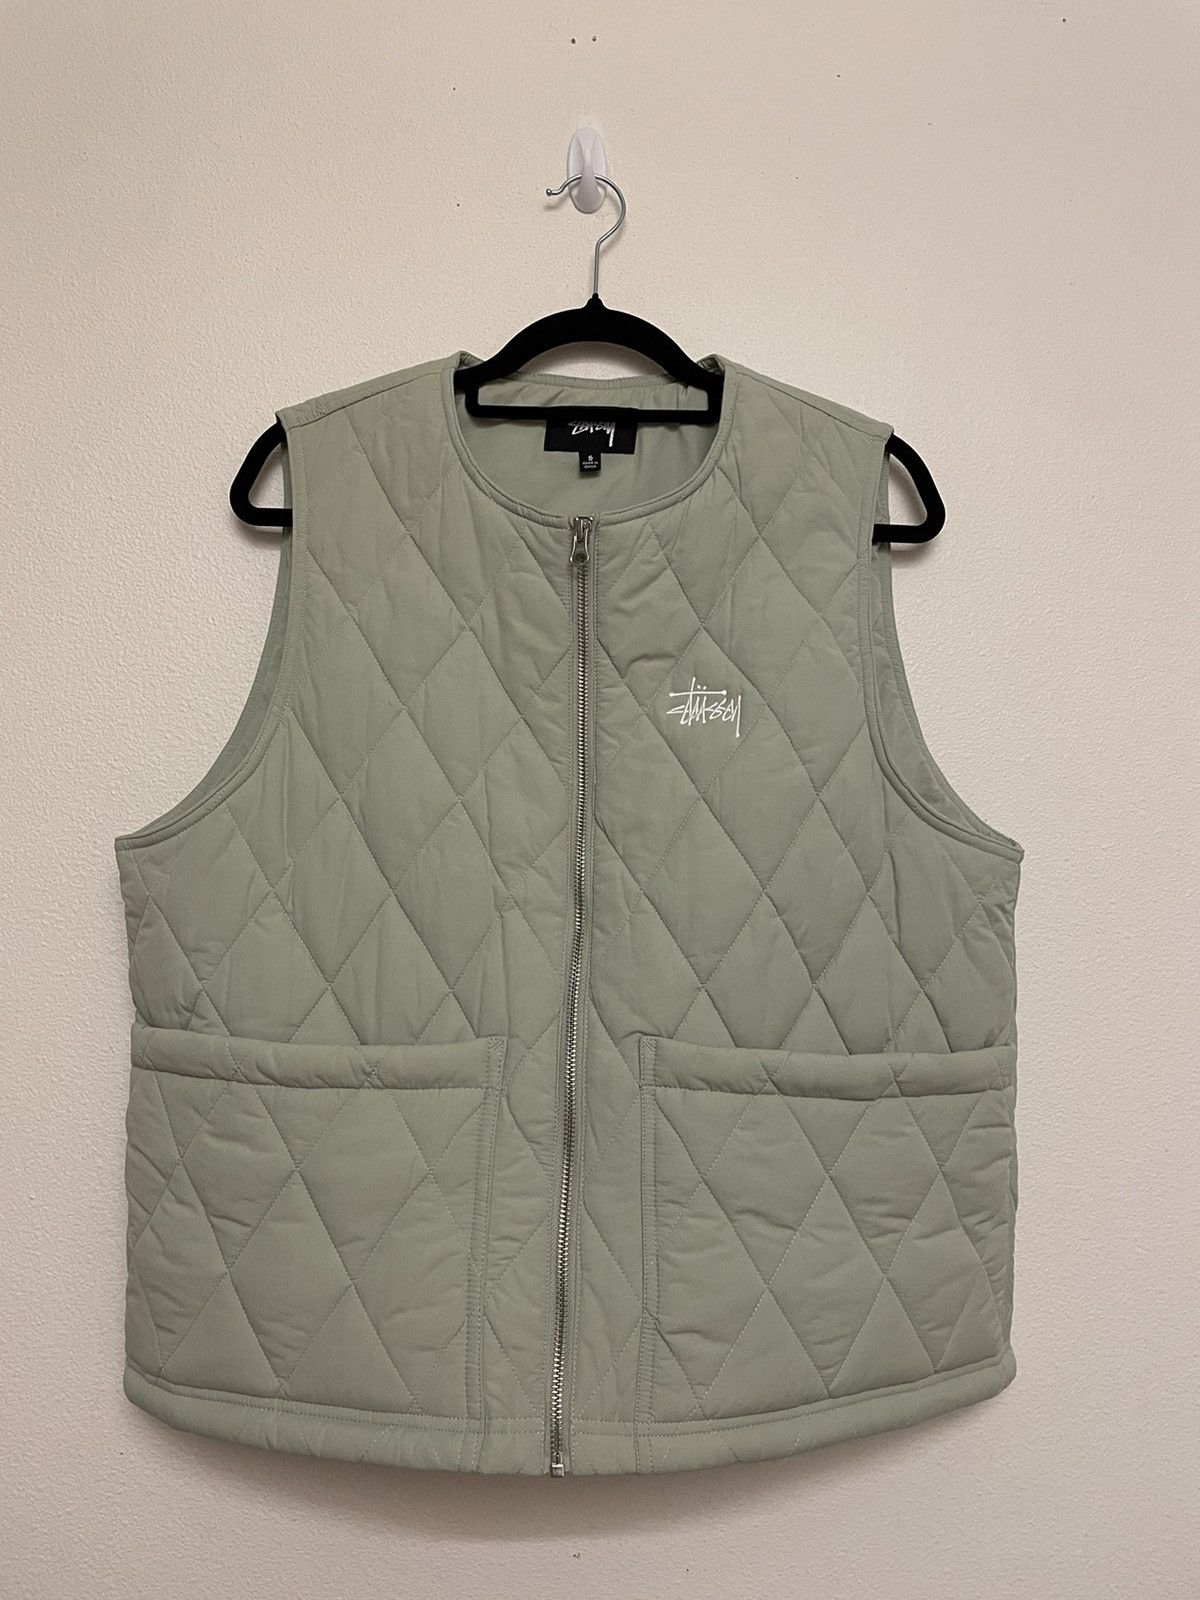 Stussy Stussy Diamond Quilted Vest | Grailed